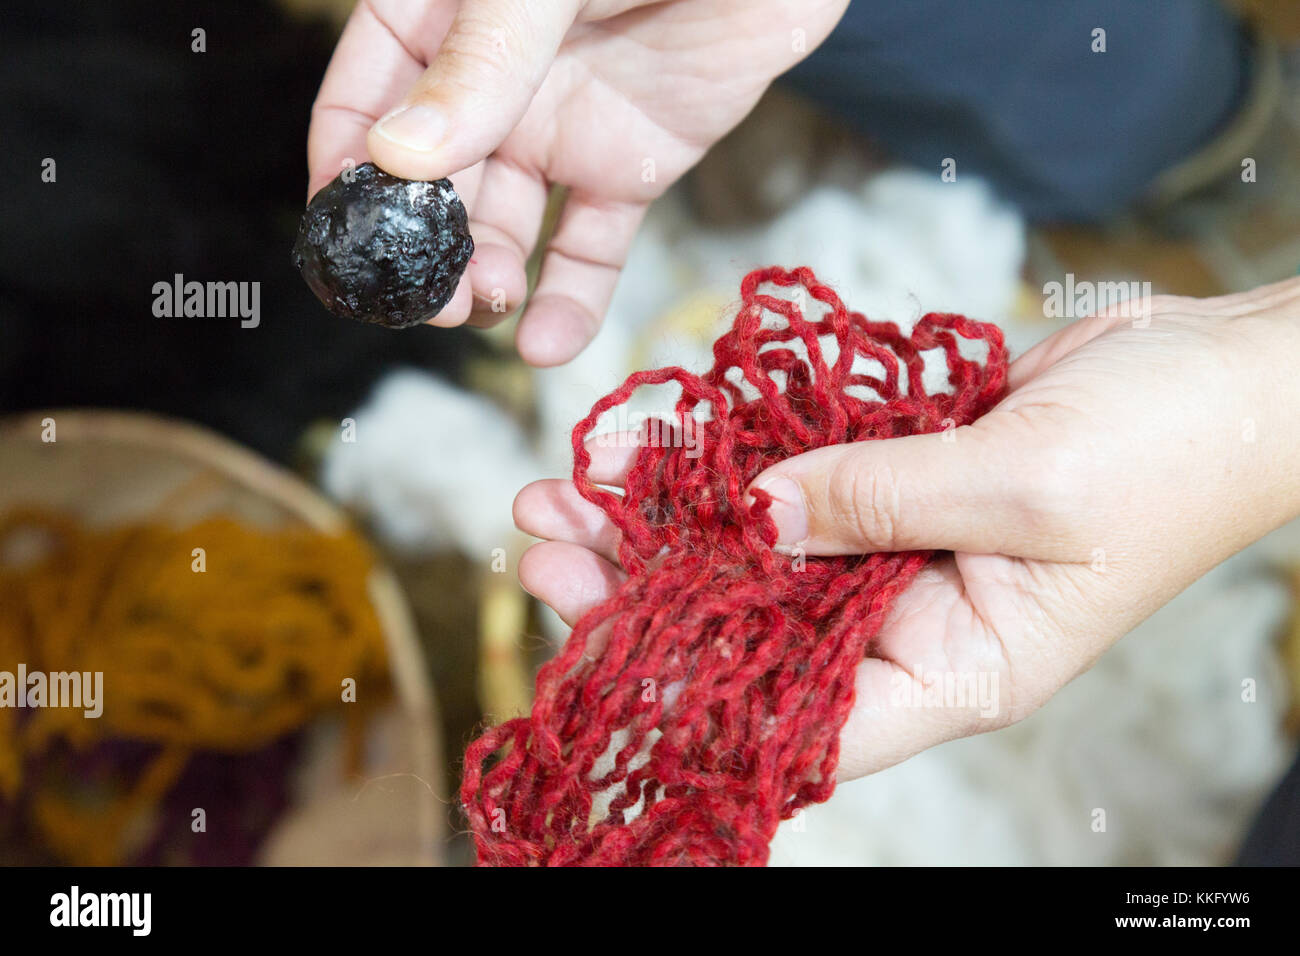 Ecuador culture - a ball of cochineal dye used to traditionally dye wool red, and the wool, in traditional weaving, Ecuador, South America Stock Photo